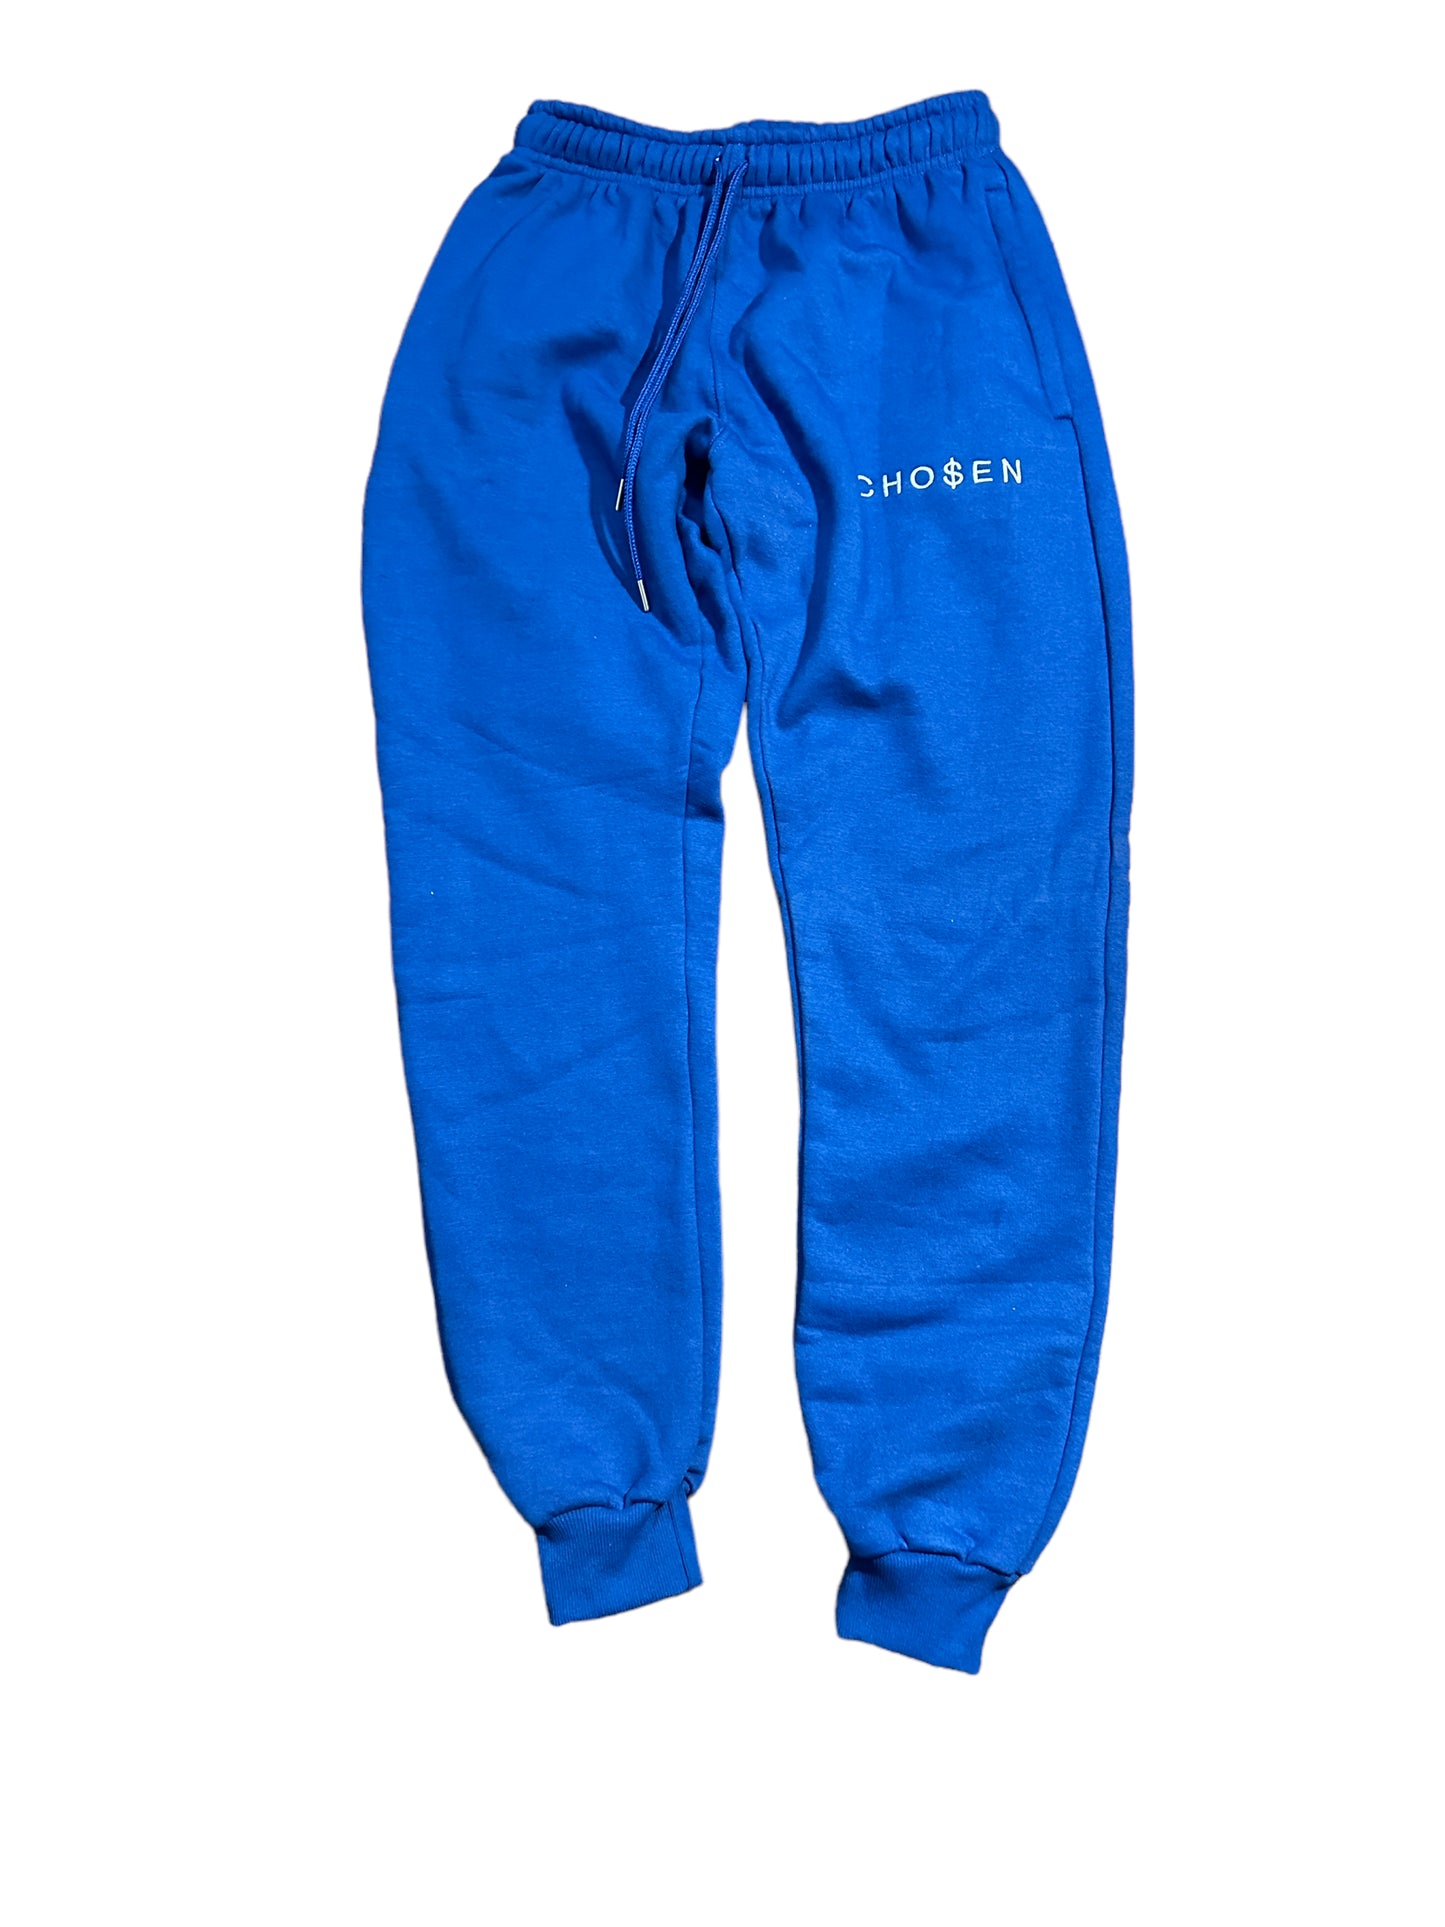 Cho$en Sweat Suit: Bold Blue Edition Top & Bottom -  Inspired  By All